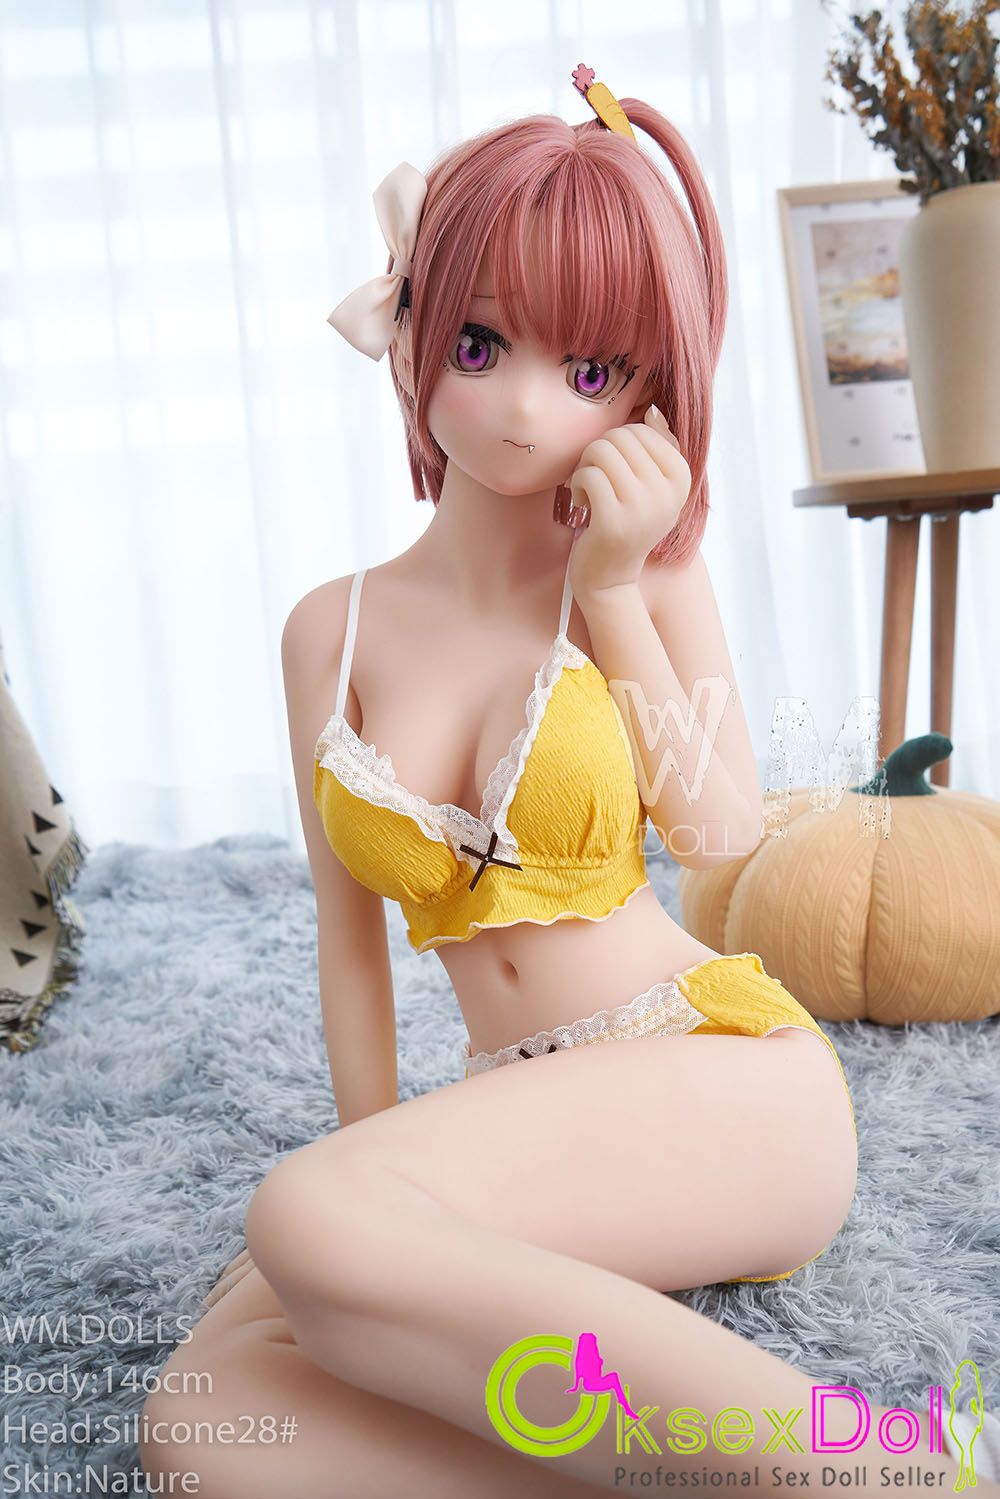 C-cup Doll Gallery